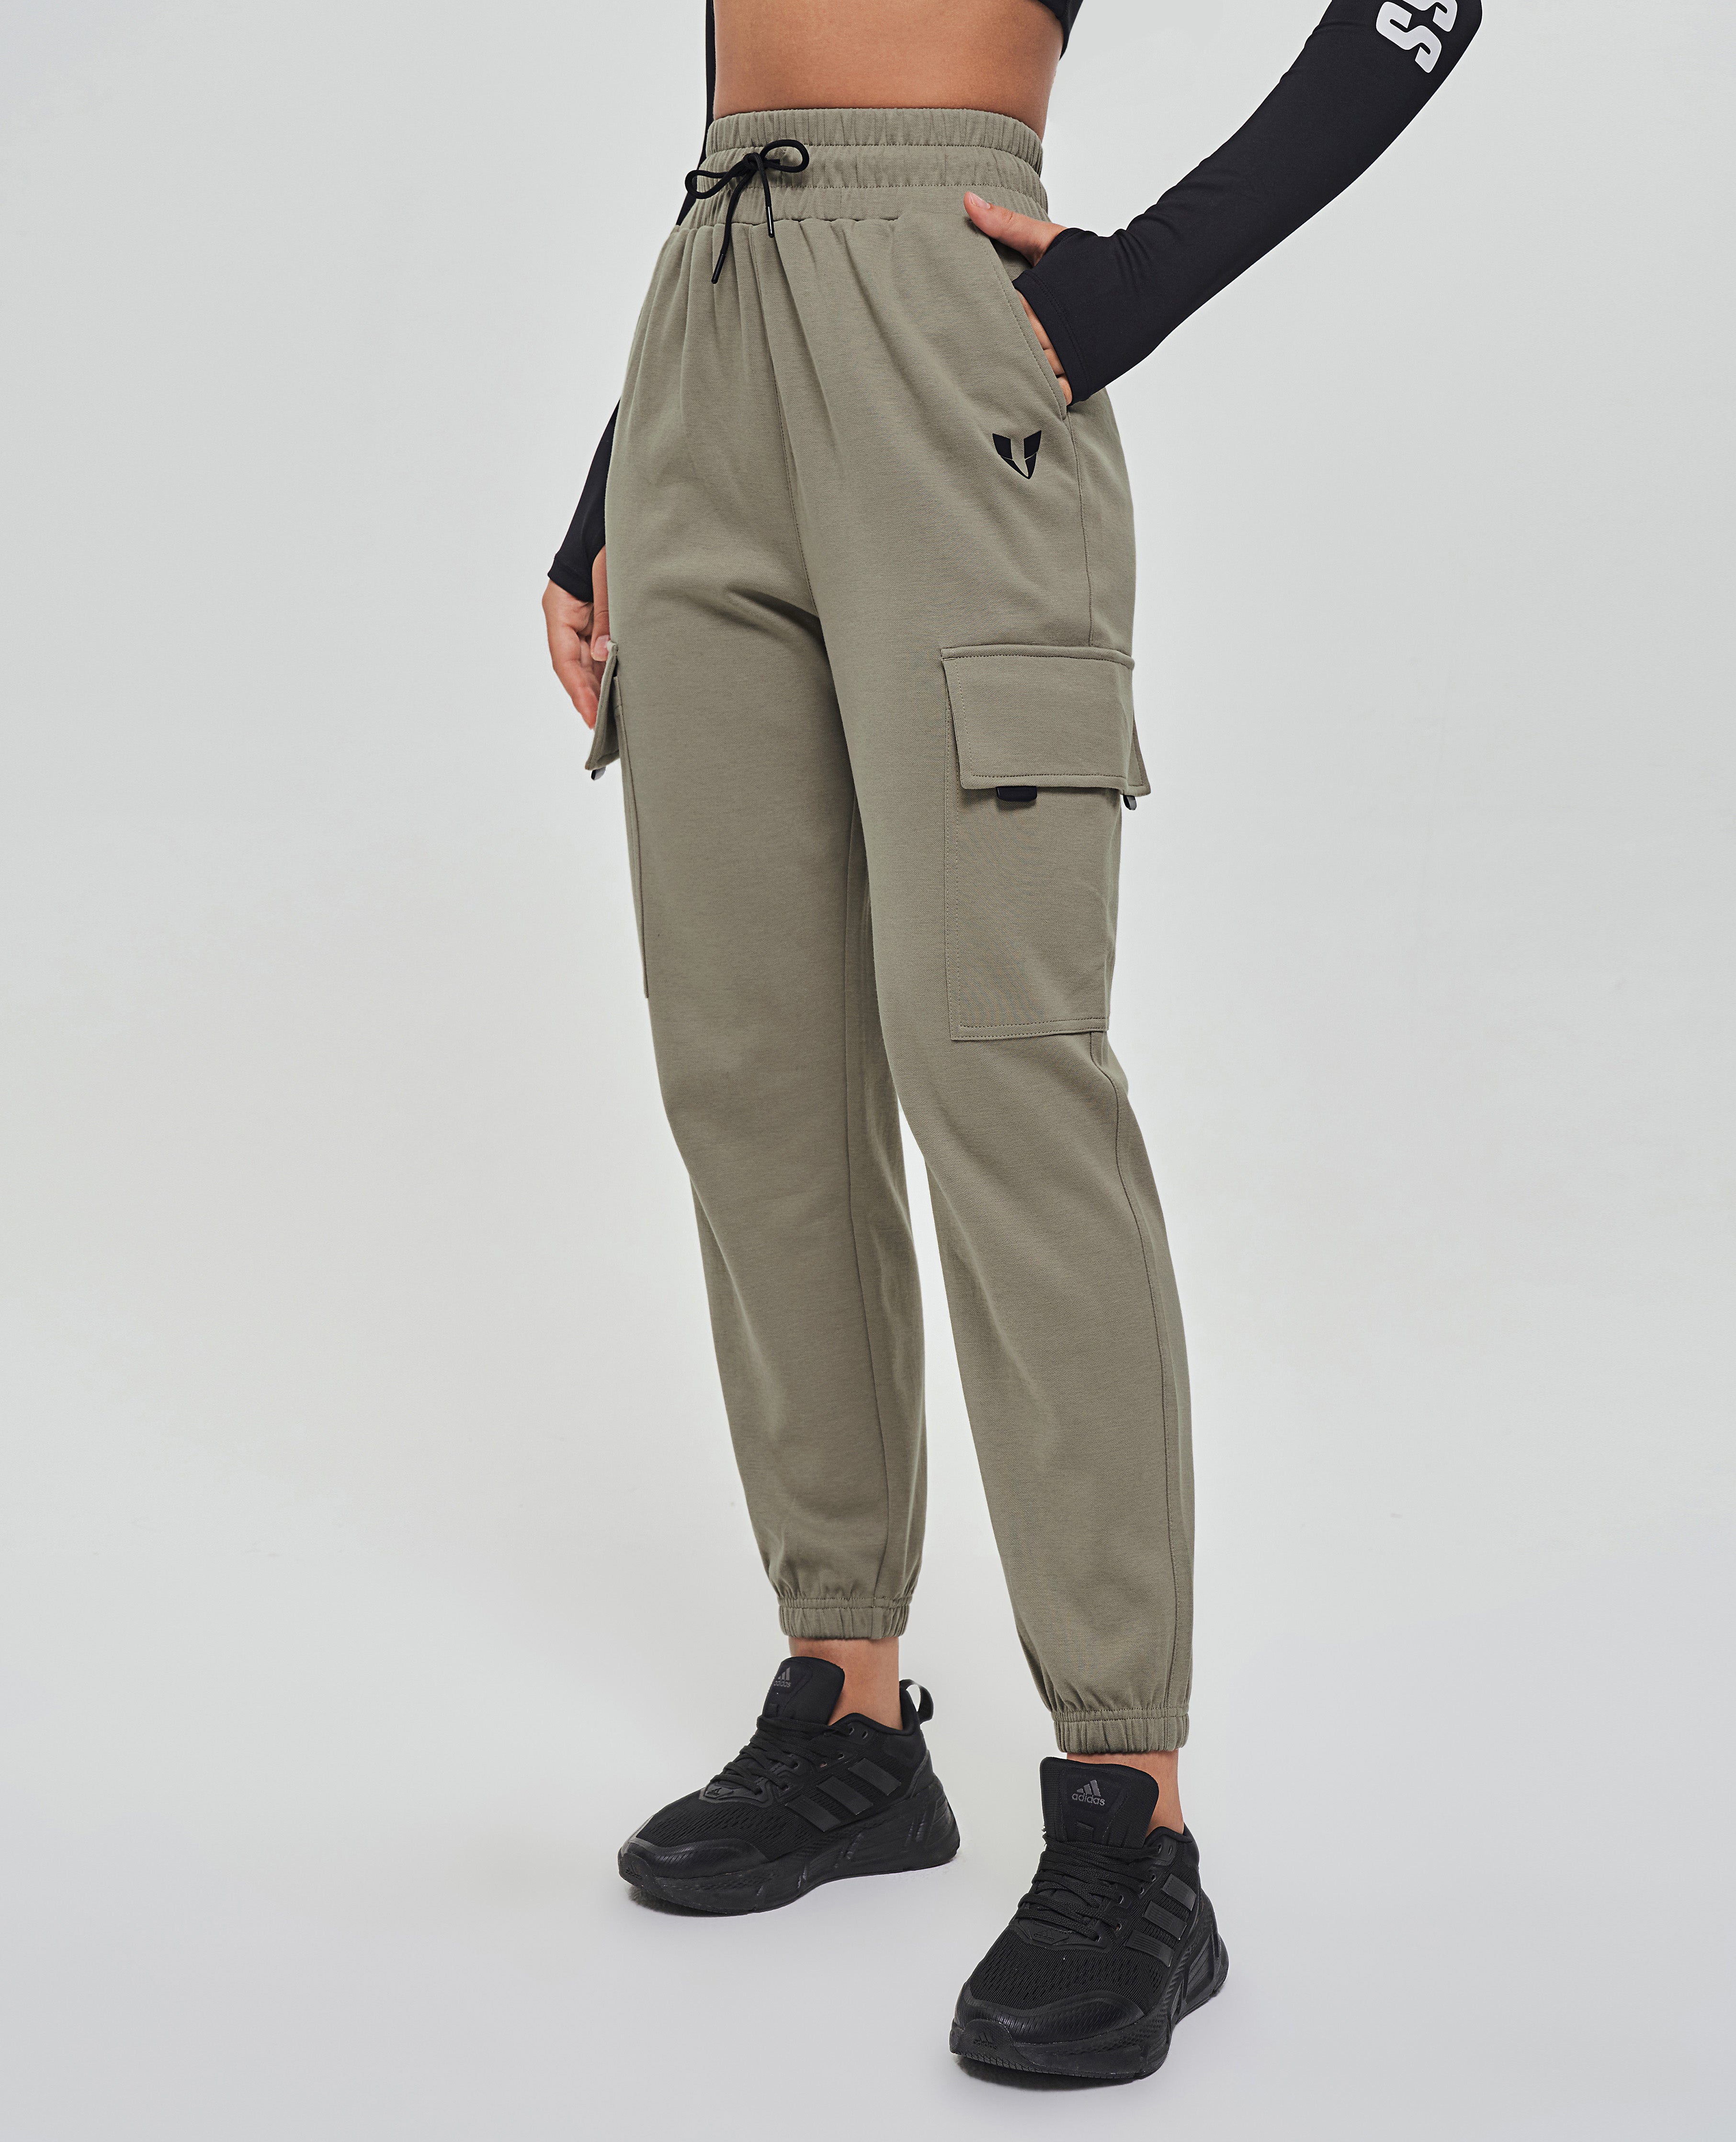 Wide Leg Sweatpants for Joggers ABS FIRM Cargo | | Women